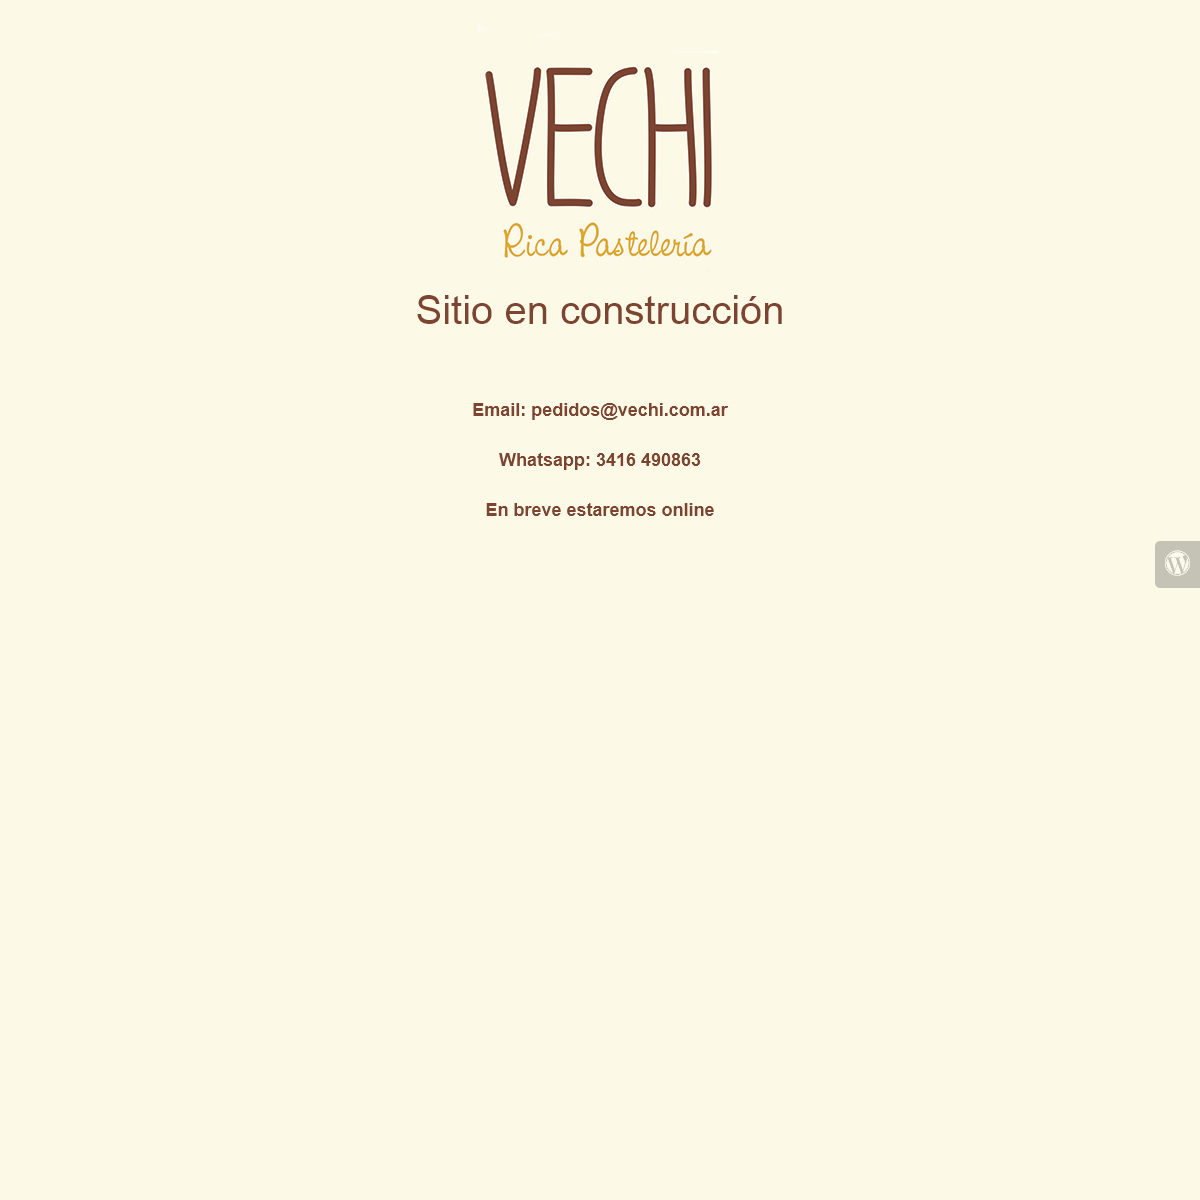 A complete backup of vechi.com.ar